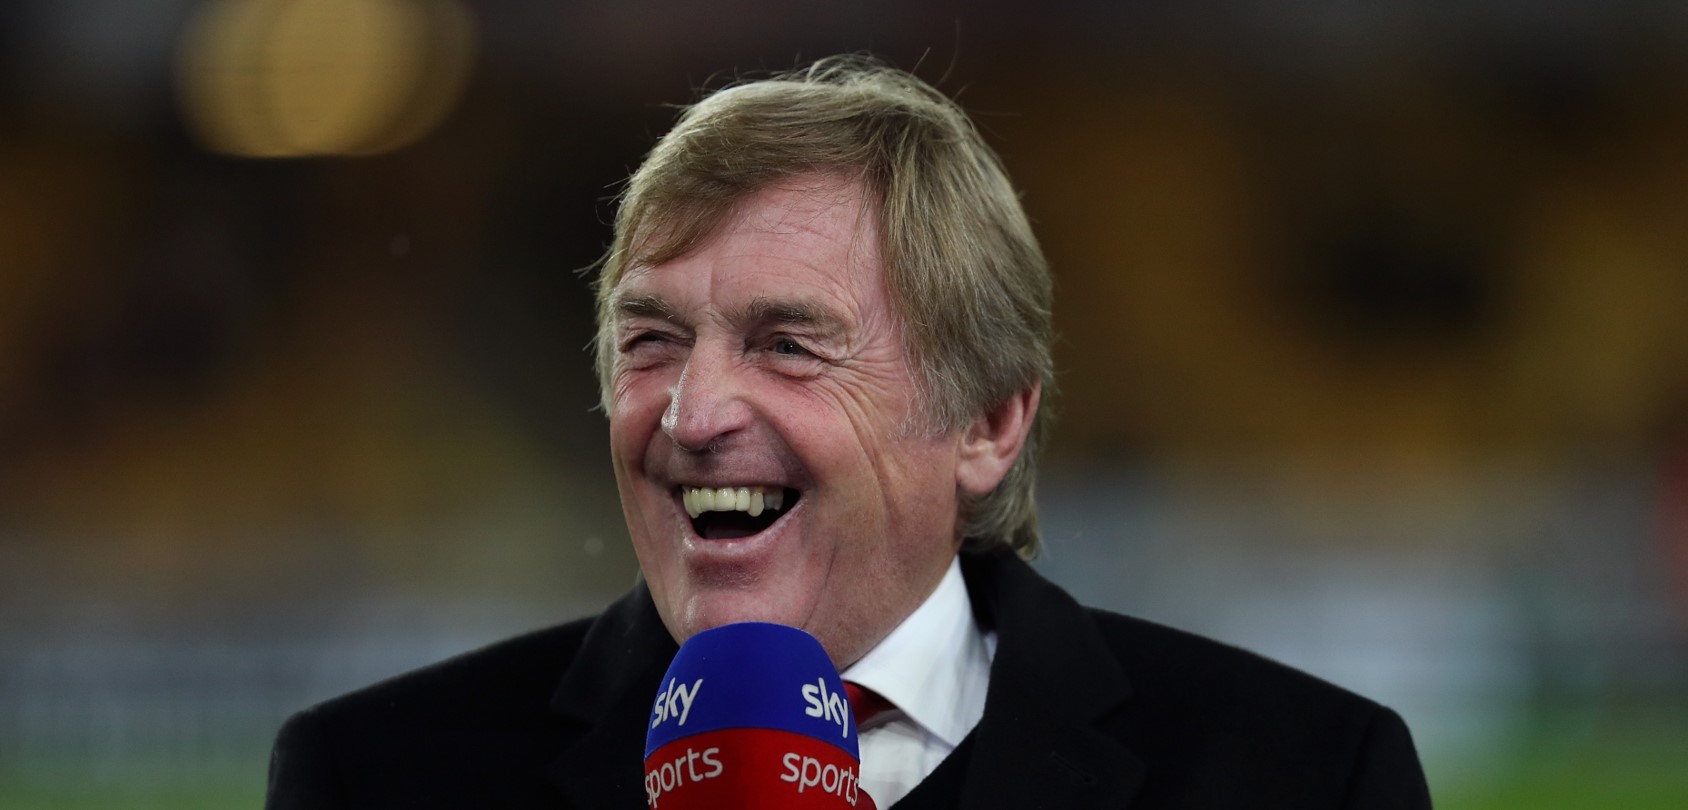 Dalglish family social media jokes about Kenny’s laughing appearance after Liverpool’s fifth goal at Old Trafford